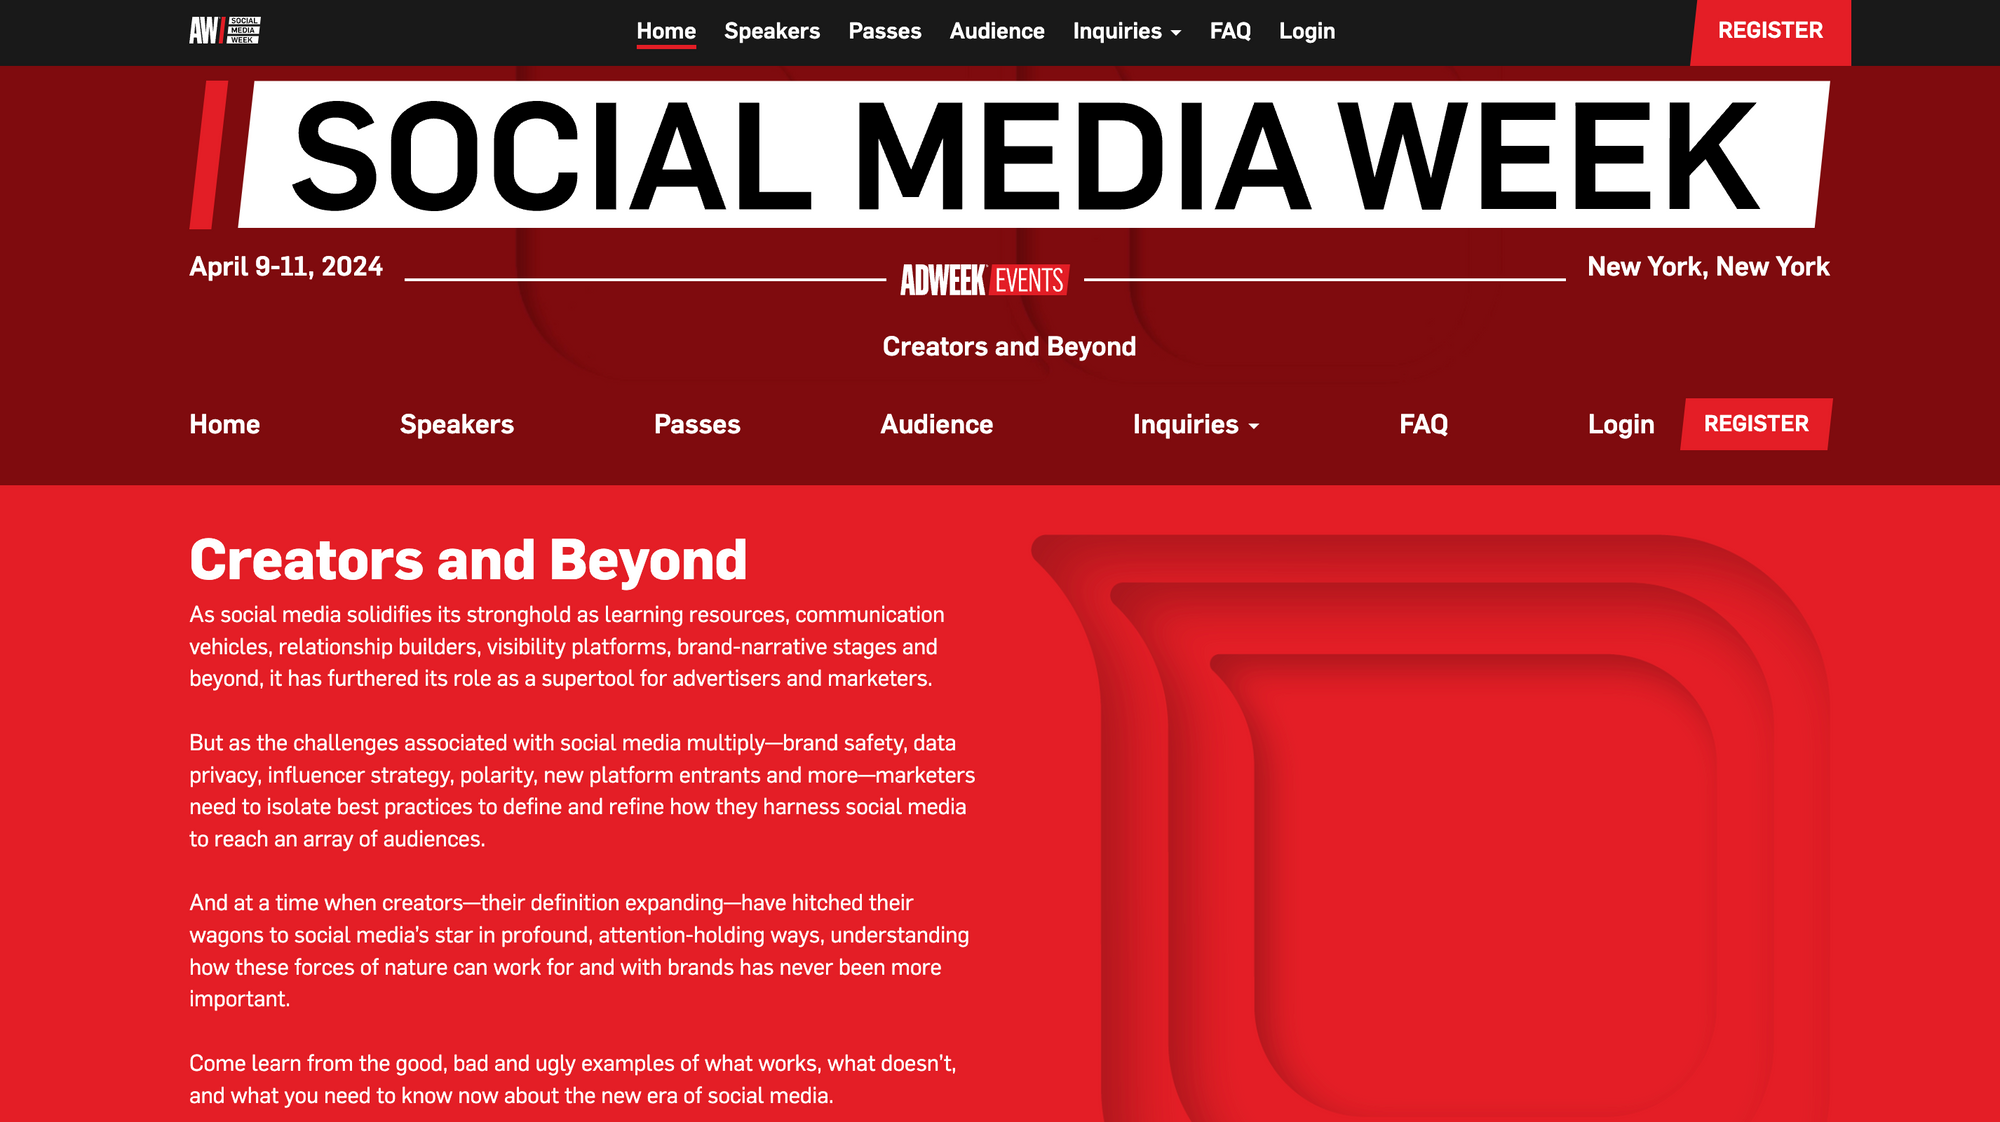 screenshot from the main page of social media week by adweek